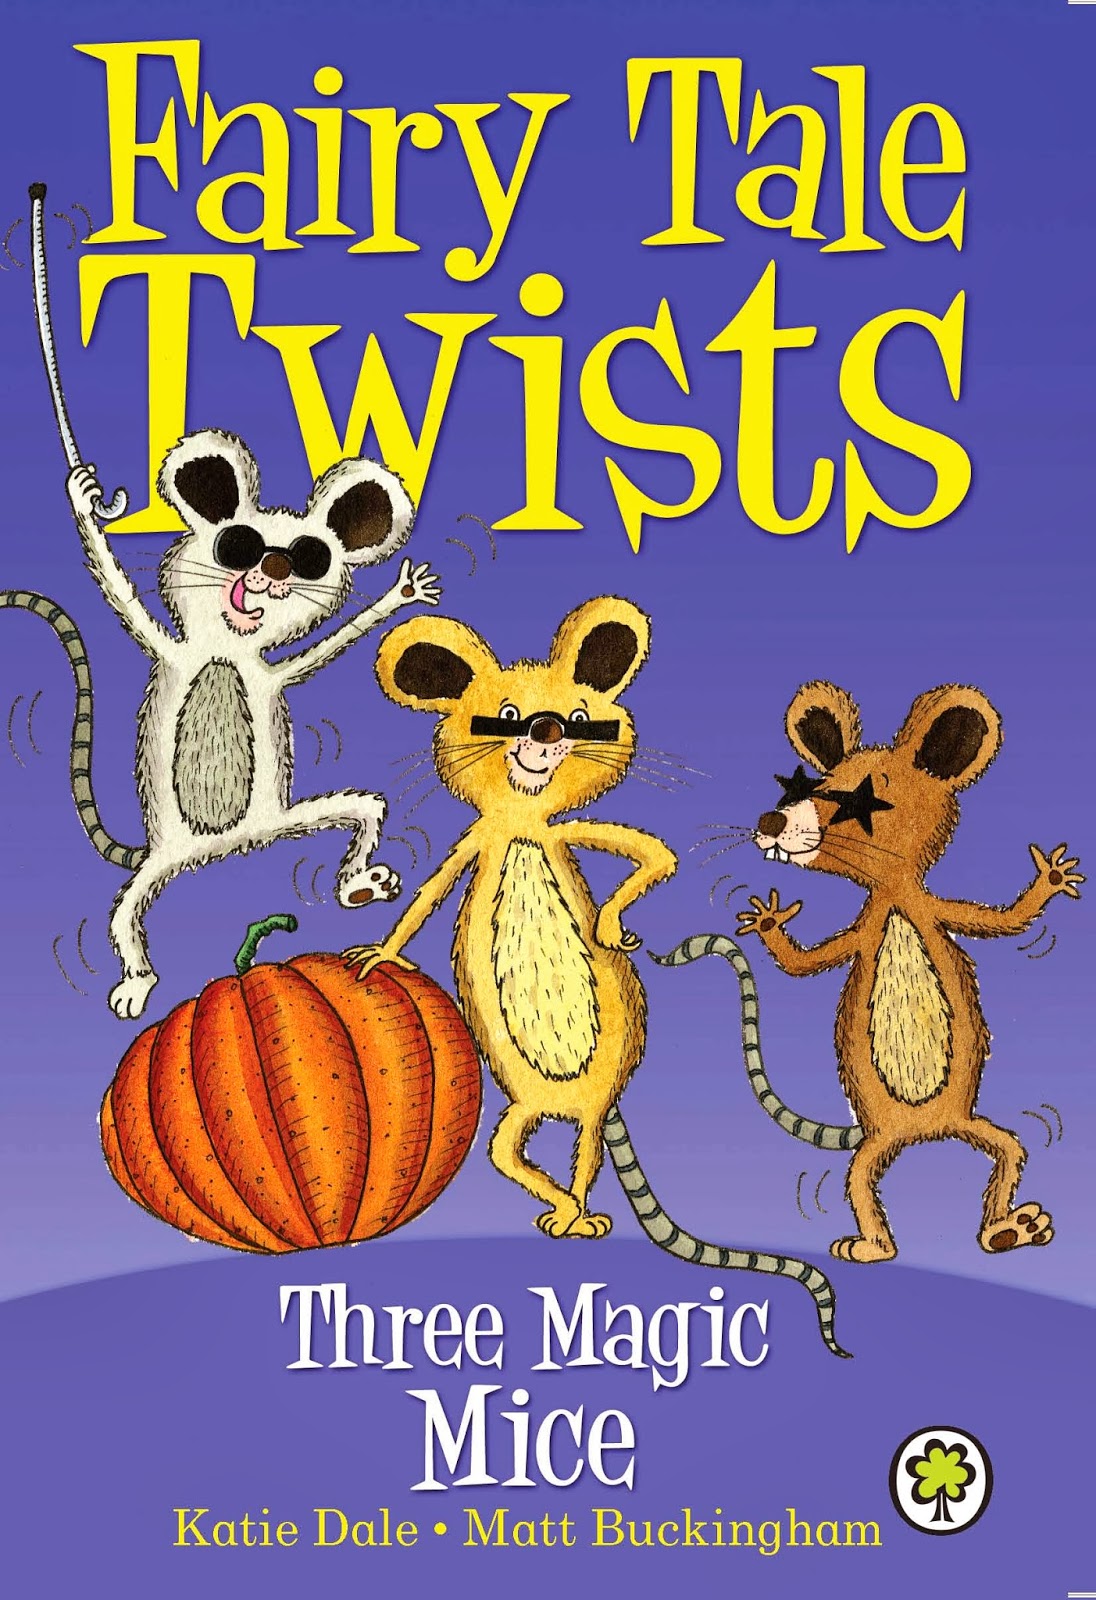 Three mice. Magic Mouse. Dale Katie "Sid's Stick". A Twist in the Tale.